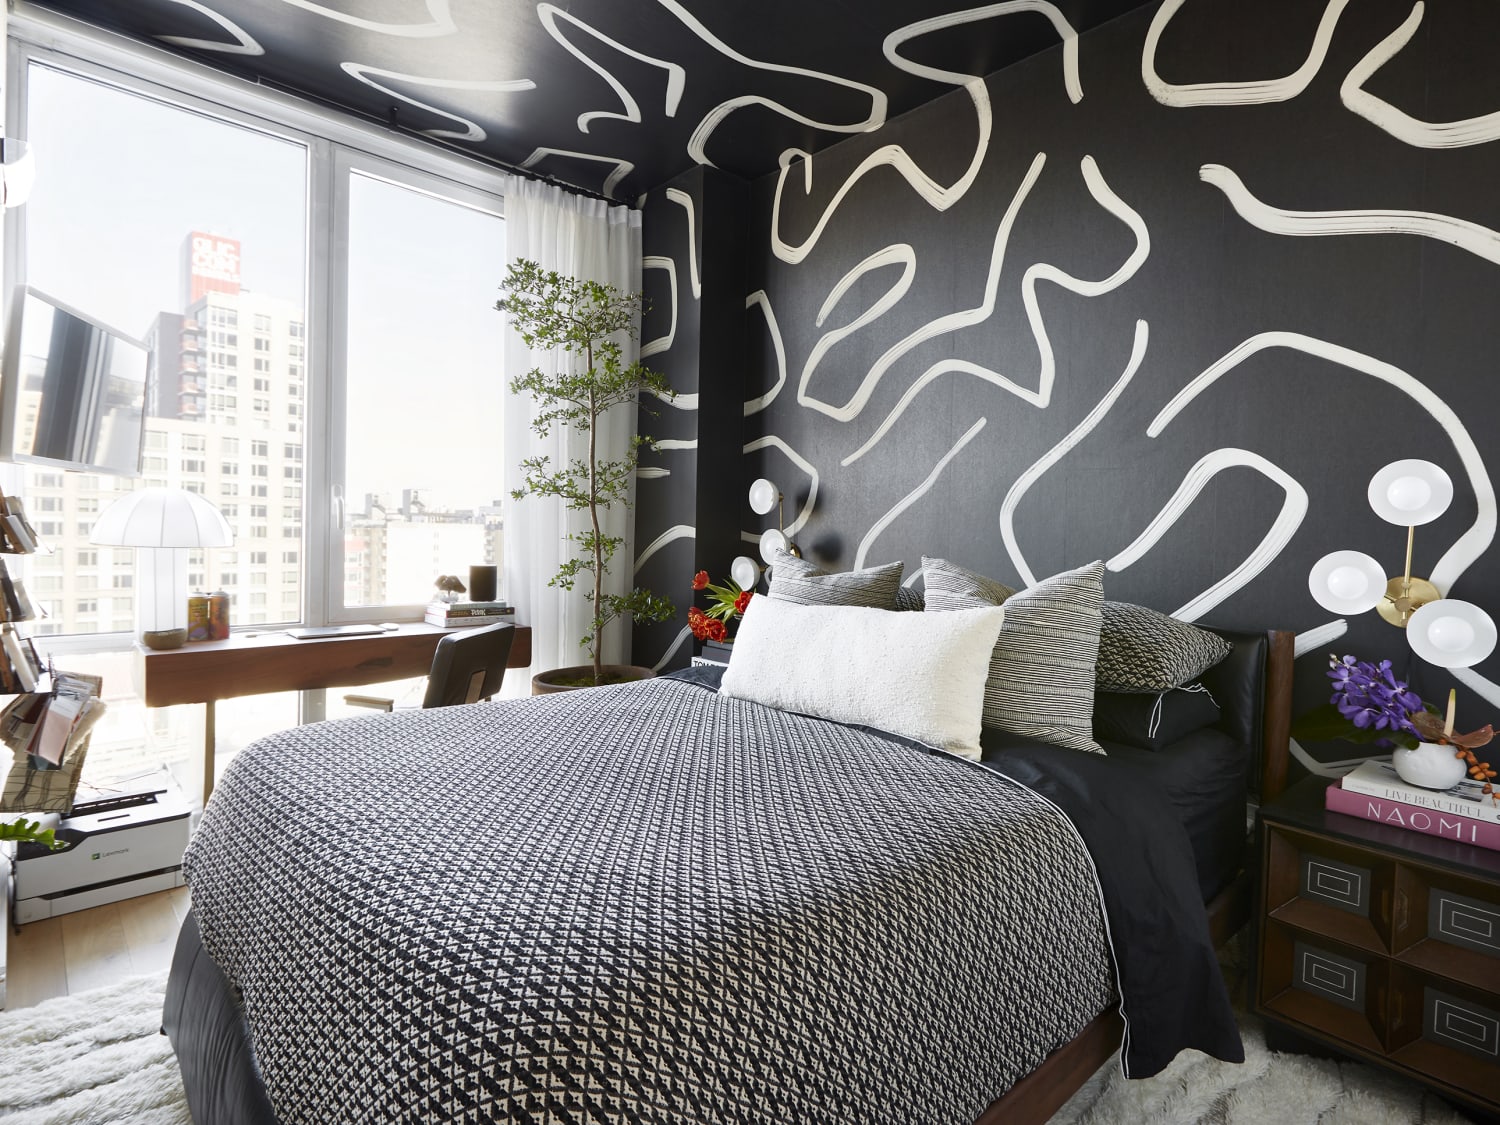 15 Black and White Bedroom Ideas (With Inspiring Photos) | Apartment Therapy